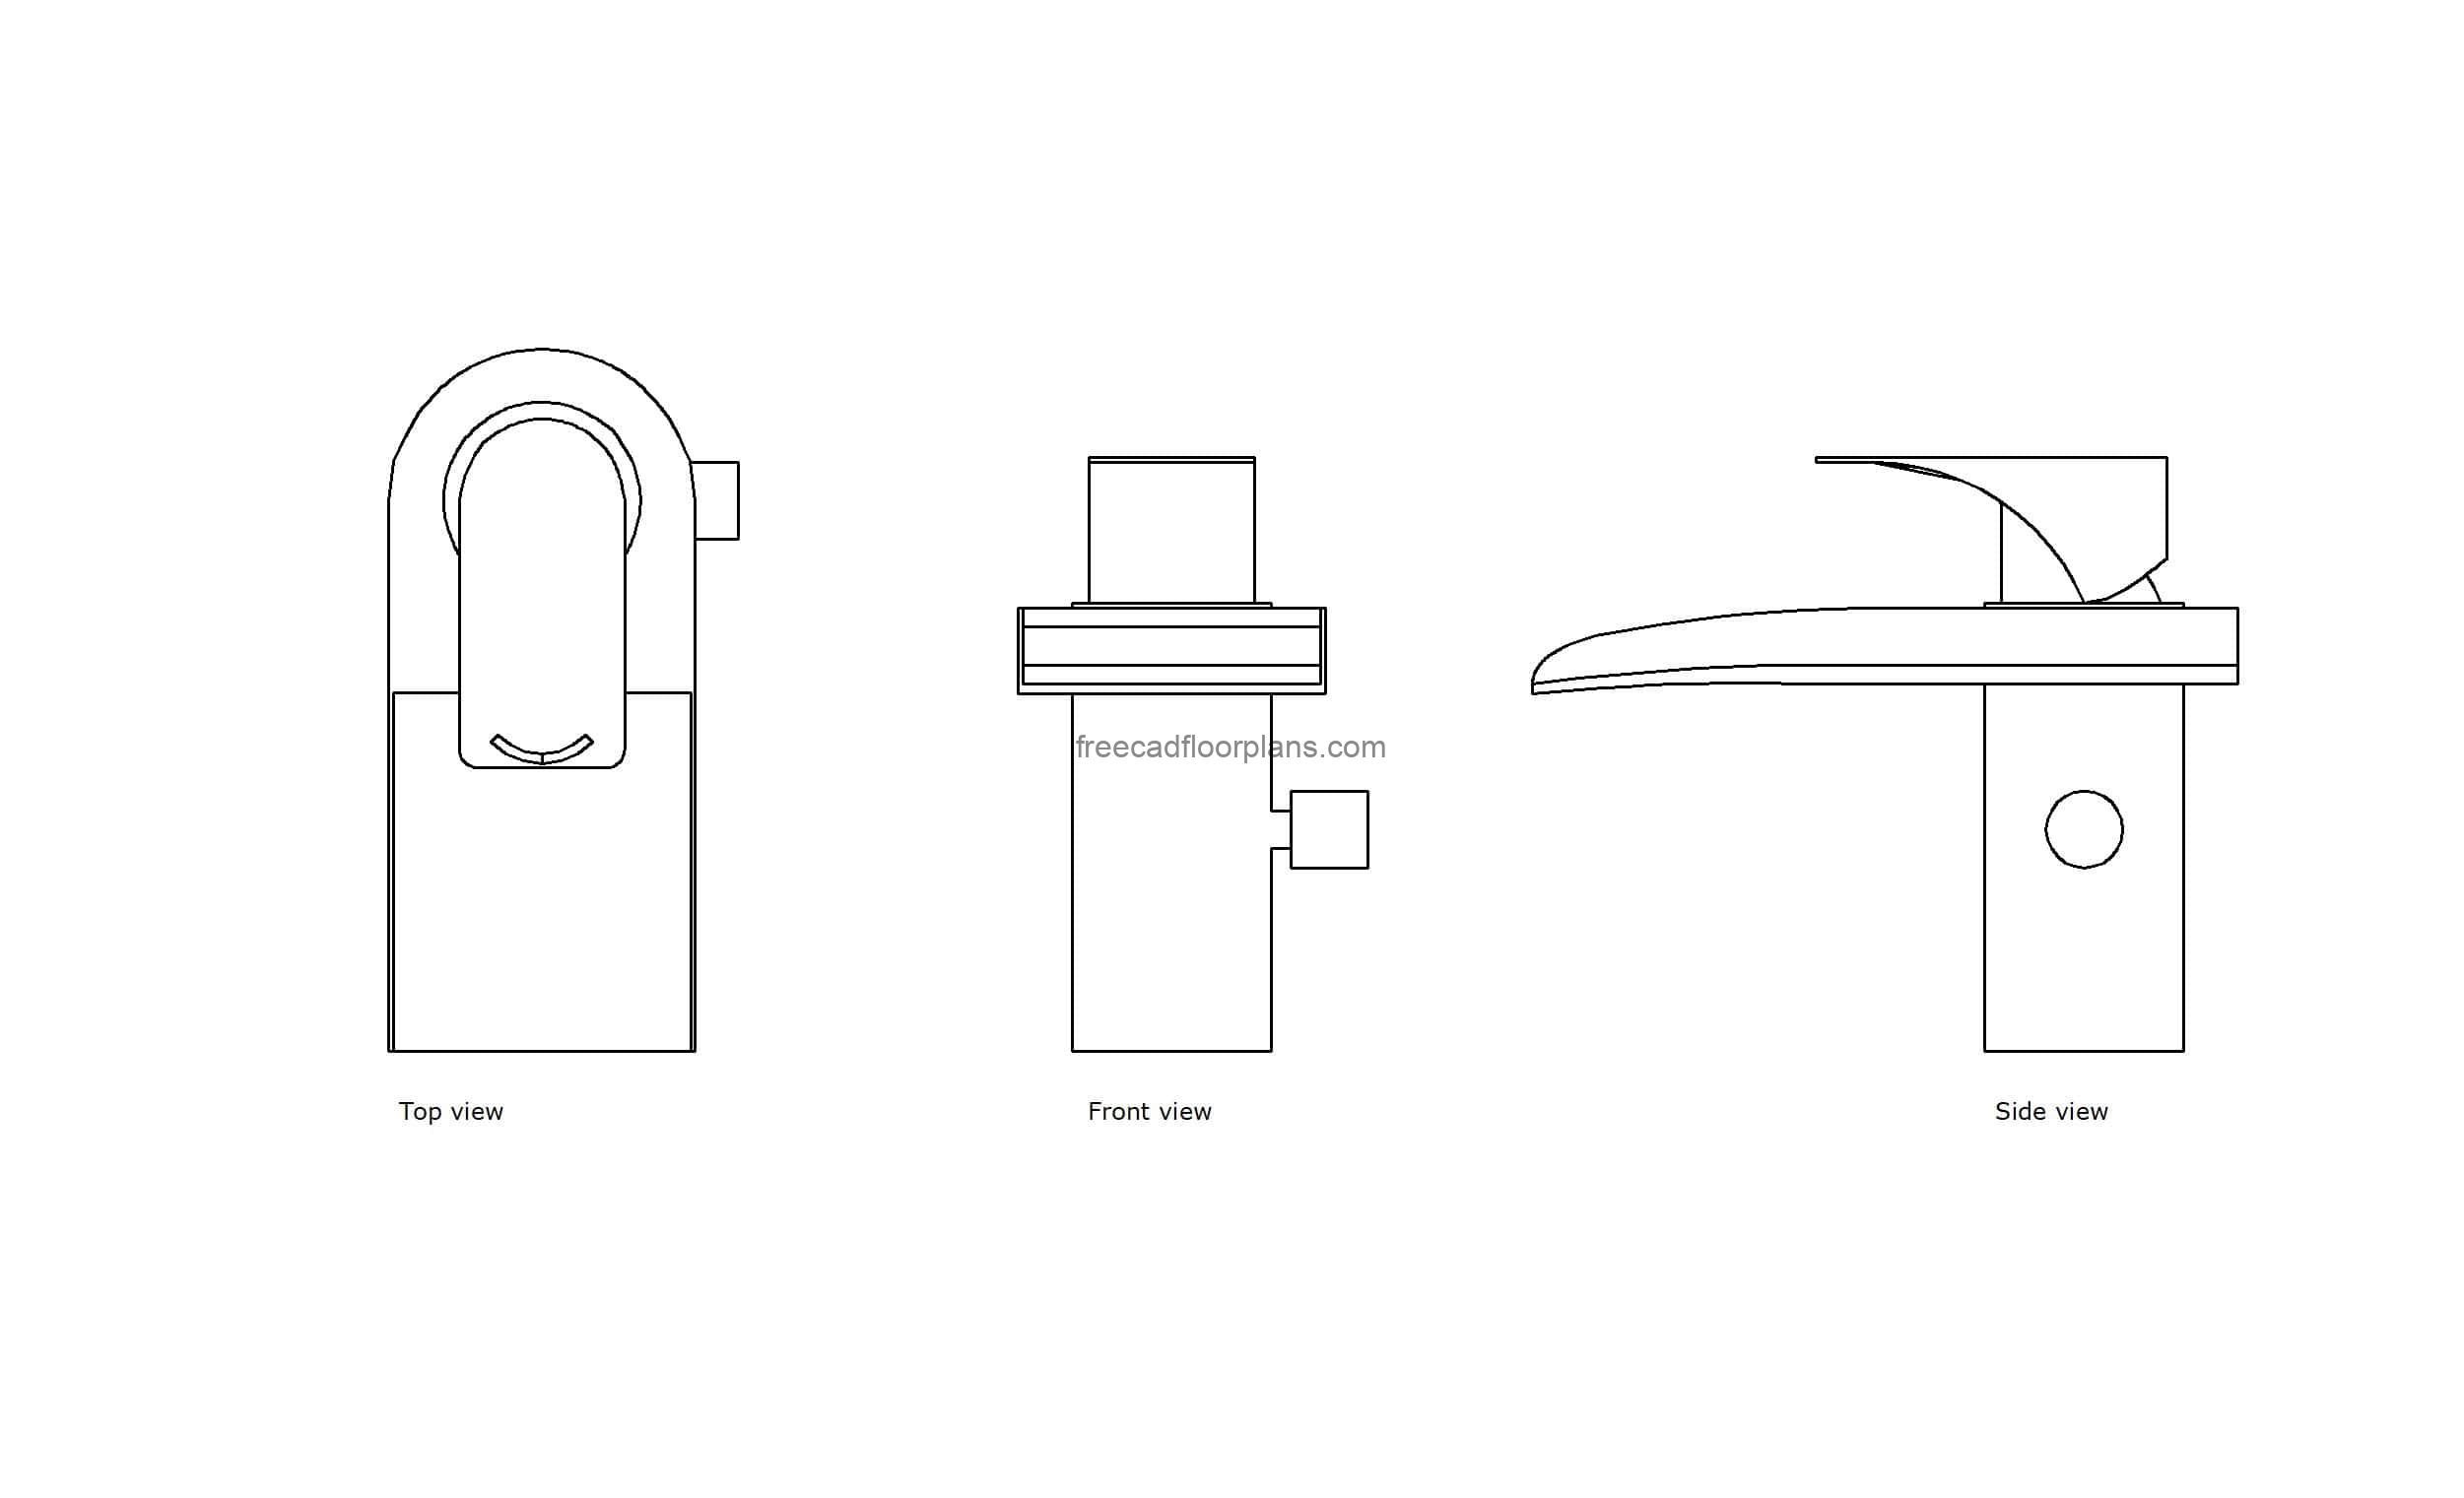 autocad drawing of a waterfall faucet, plan and elevation 2d views, dwg file free for download